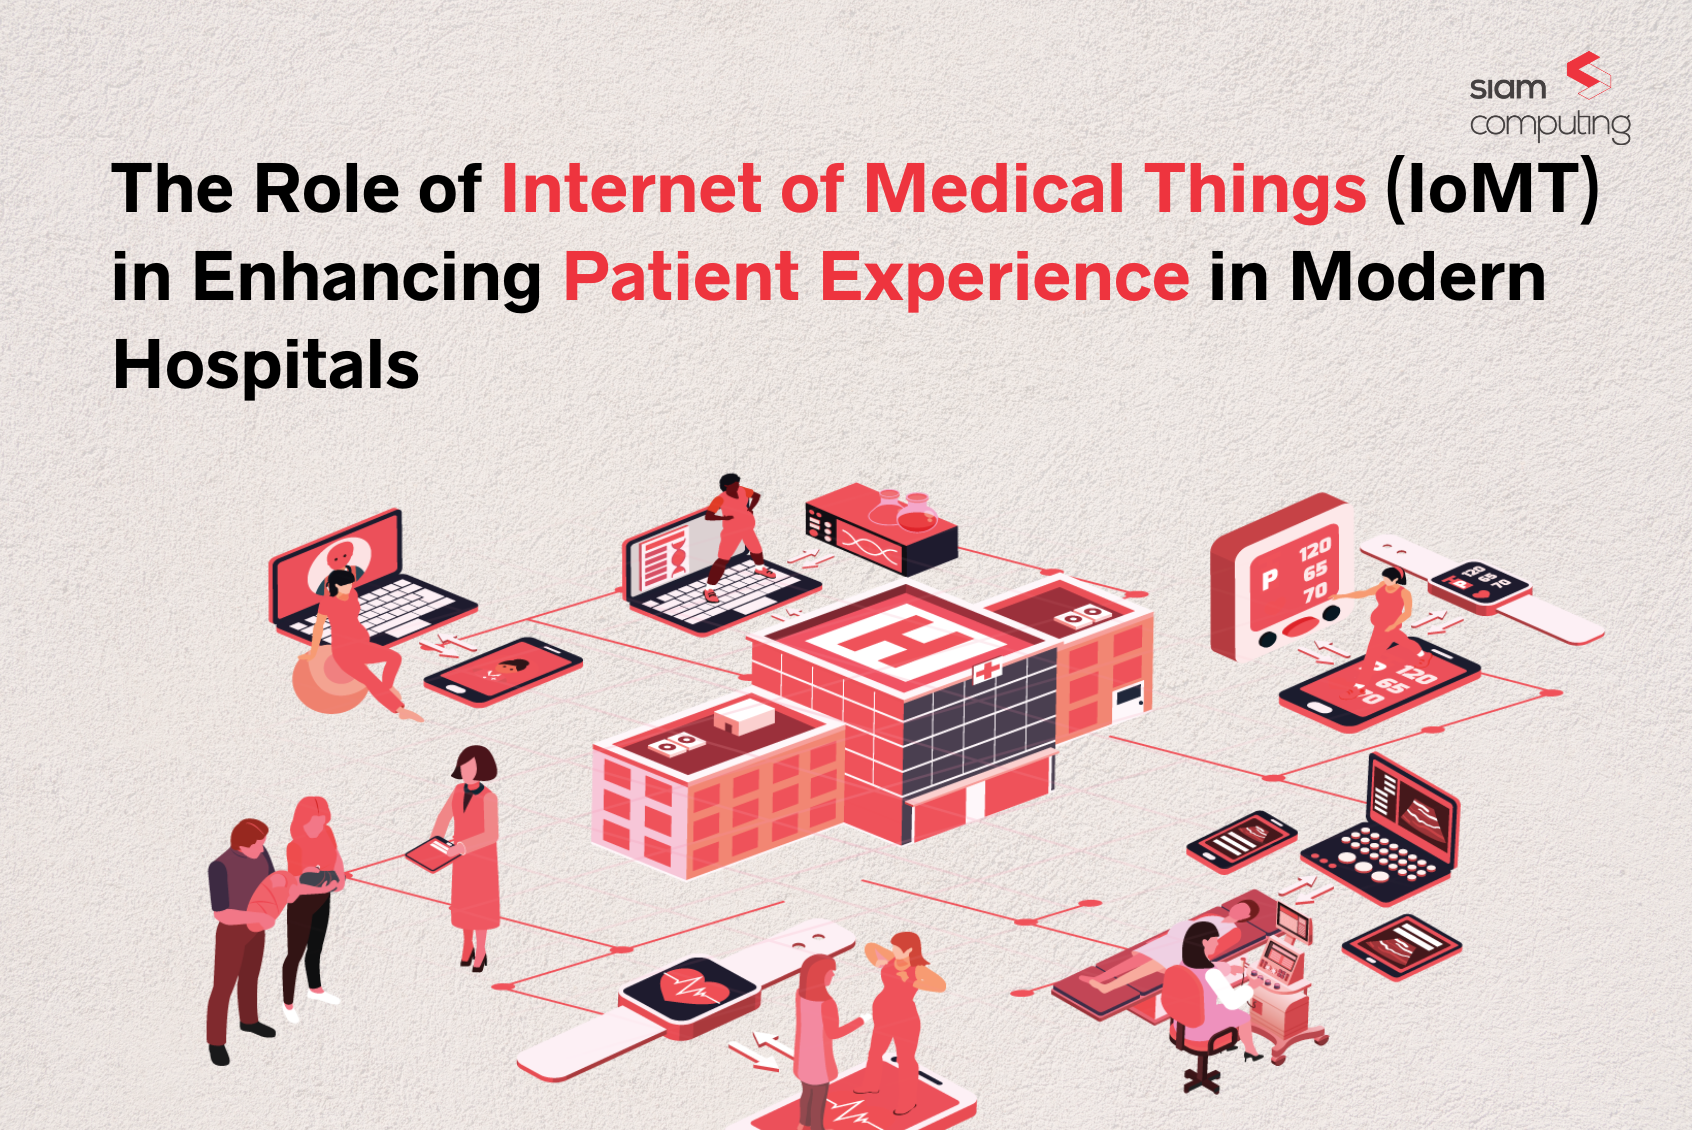 The Role of Internet of Medical Things (IoMT) in Enhancing Patient Experience in Modern Hospitals